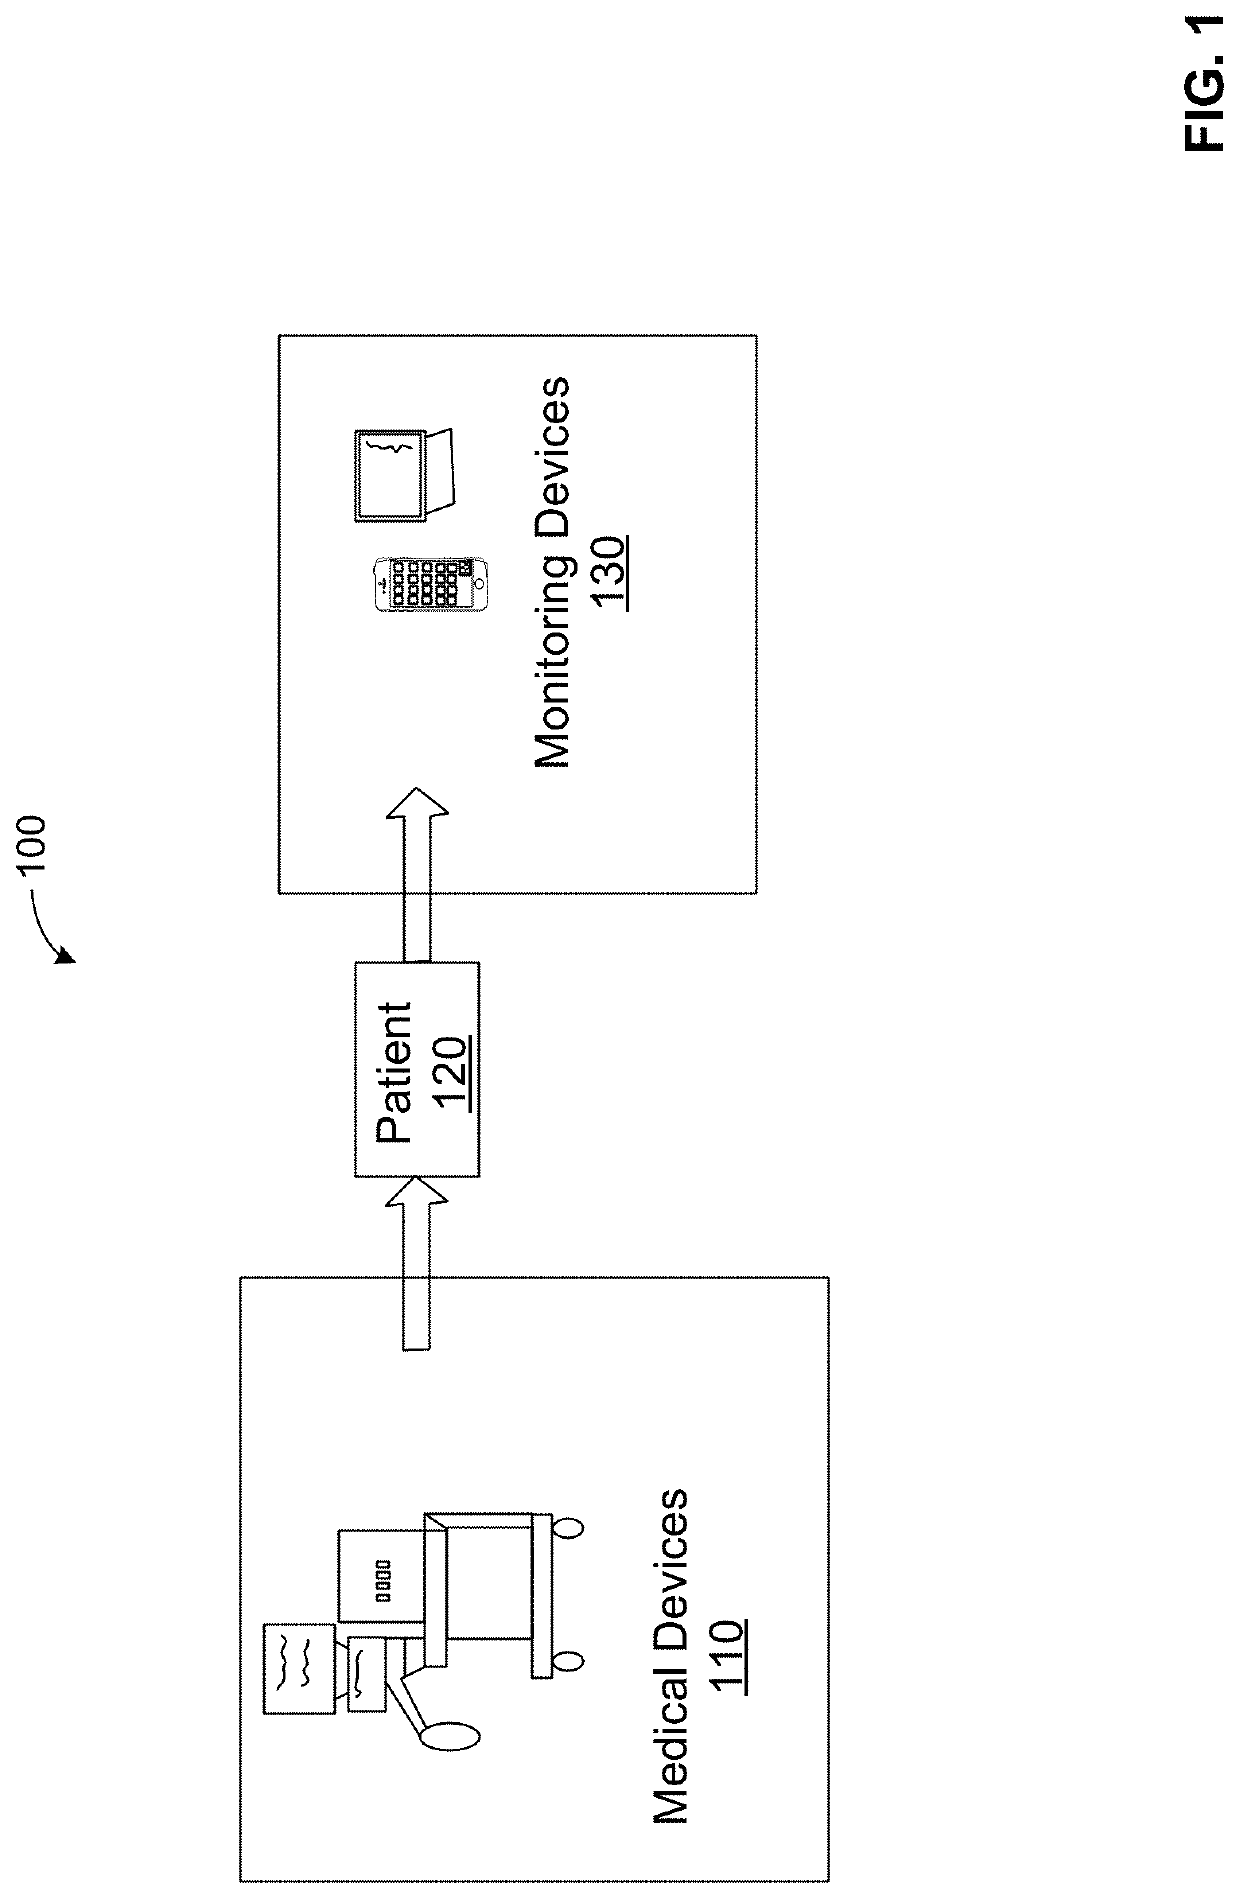 Medical Machine Synthetic Data and Corresponding Event Generation